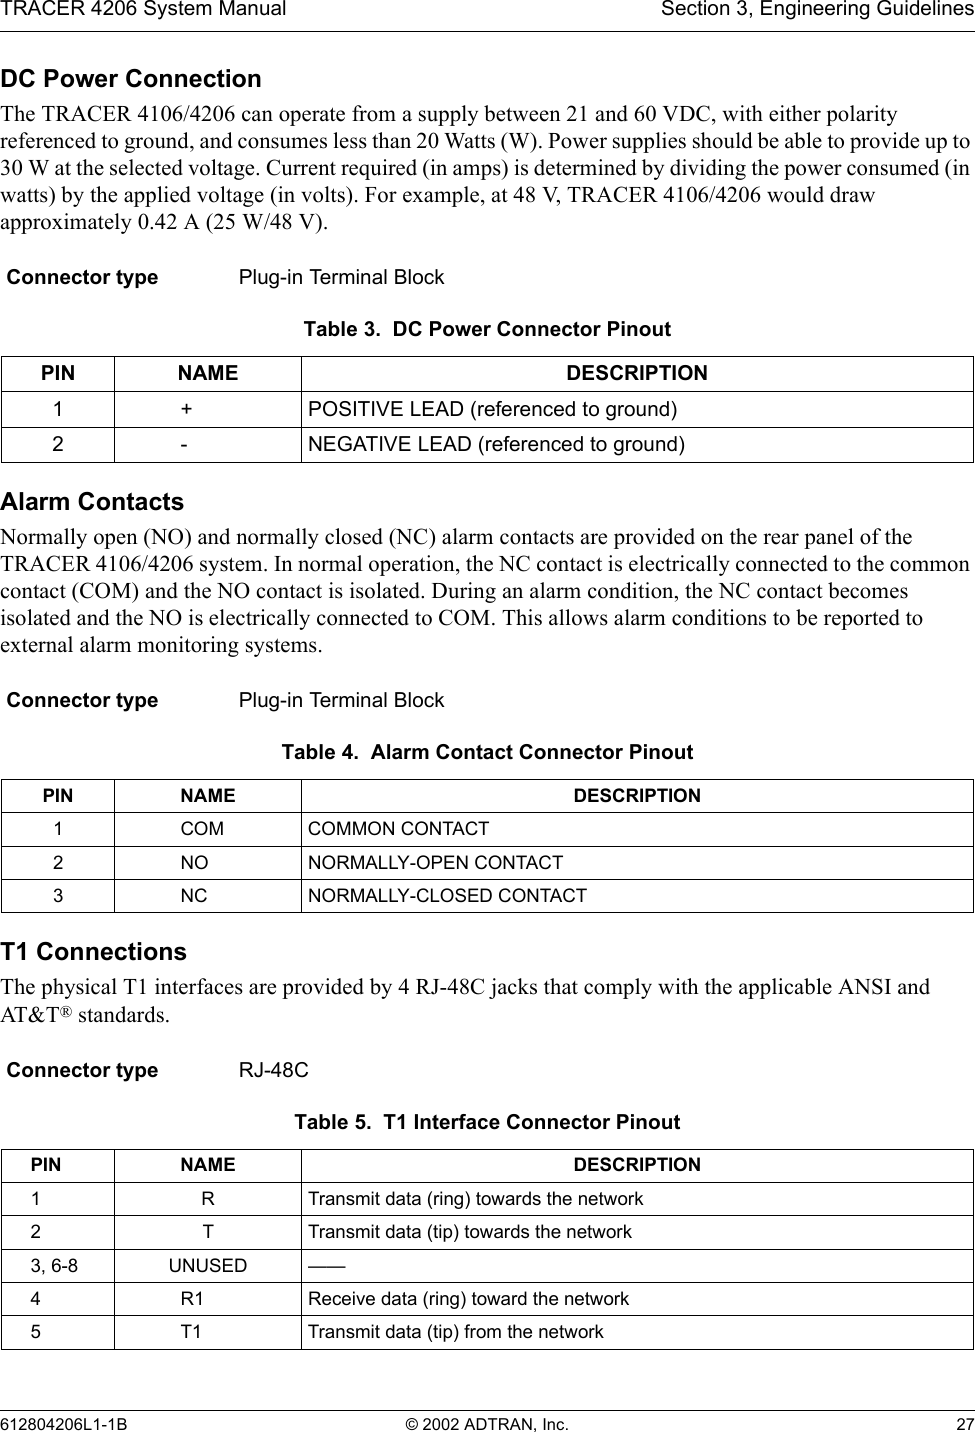 TRACER 4206 System Manual Section 3, Engineering Guidelines612804206L1-1B © 2002 ADTRAN, Inc. 27DC Power ConnectionThe TRACER 4106/4206 can operate from a supply between 21 and 60 VDC, with either polarity referenced to ground, and consumes less than 20 Watts (W). Power supplies should be able to provide up to 30 W at the selected voltage. Current required (in amps) is determined by dividing the power consumed (in watts) by the applied voltage (in volts). For example, at 48 V, TRACER 4106/4206 would draw approximately 0.42 A (25 W/48 V).Alarm ContactsNormally open (NO) and normally closed (NC) alarm contacts are provided on the rear panel of the TRACER 4106/4206 system. In normal operation, the NC contact is electrically connected to the common contact (COM) and the NO contact is isolated. During an alarm condition, the NC contact becomes isolated and the NO is electrically connected to COM. This allows alarm conditions to be reported to external alarm monitoring systems.T1 ConnectionsThe physical T1 interfaces are provided by 4 RJ-48C jacks that comply with the applicable ANSI and AT&amp;T ® standards.Connector type Plug-in Terminal BlockTable 3.  DC Power Connector PinoutPIN NAME DESCRIPTION1+ POSITIVE LEAD (referenced to ground)2- NEGATIVE LEAD (referenced to ground)Connector type Plug-in Terminal BlockTable 4.  Alarm Contact Connector PinoutPIN NAME DESCRIPTION1COM COMMON CONTACT2NO NORMALLY-OPEN CONTACT3NC NORMALLY-CLOSED CONTACTConnector type RJ-48CTable 5.  T1 Interface Connector PinoutPIN NAME DESCRIPTION1 R Transmit data (ring) towards the network2 T Transmit data (tip) towards the network3, 6-8 UNUSED ——4R1 Receive data (ring) toward the network5T1 Transmit data (tip) from the network